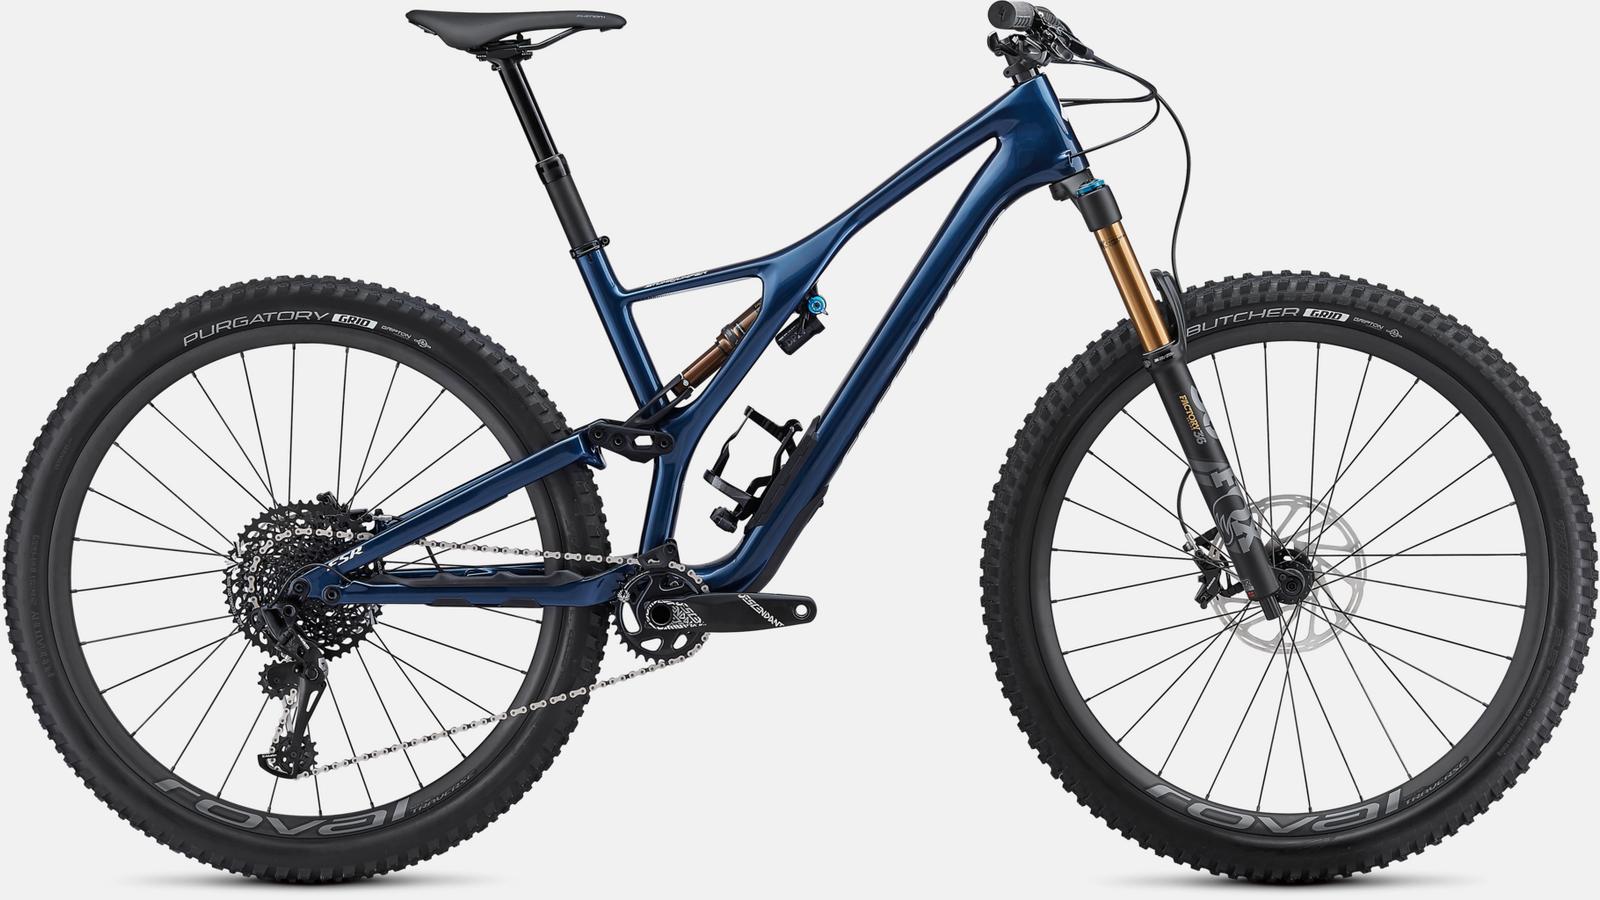 Paint for 2019 Specialized Men's Stumpjumper Pro 29 - Gloss Navy